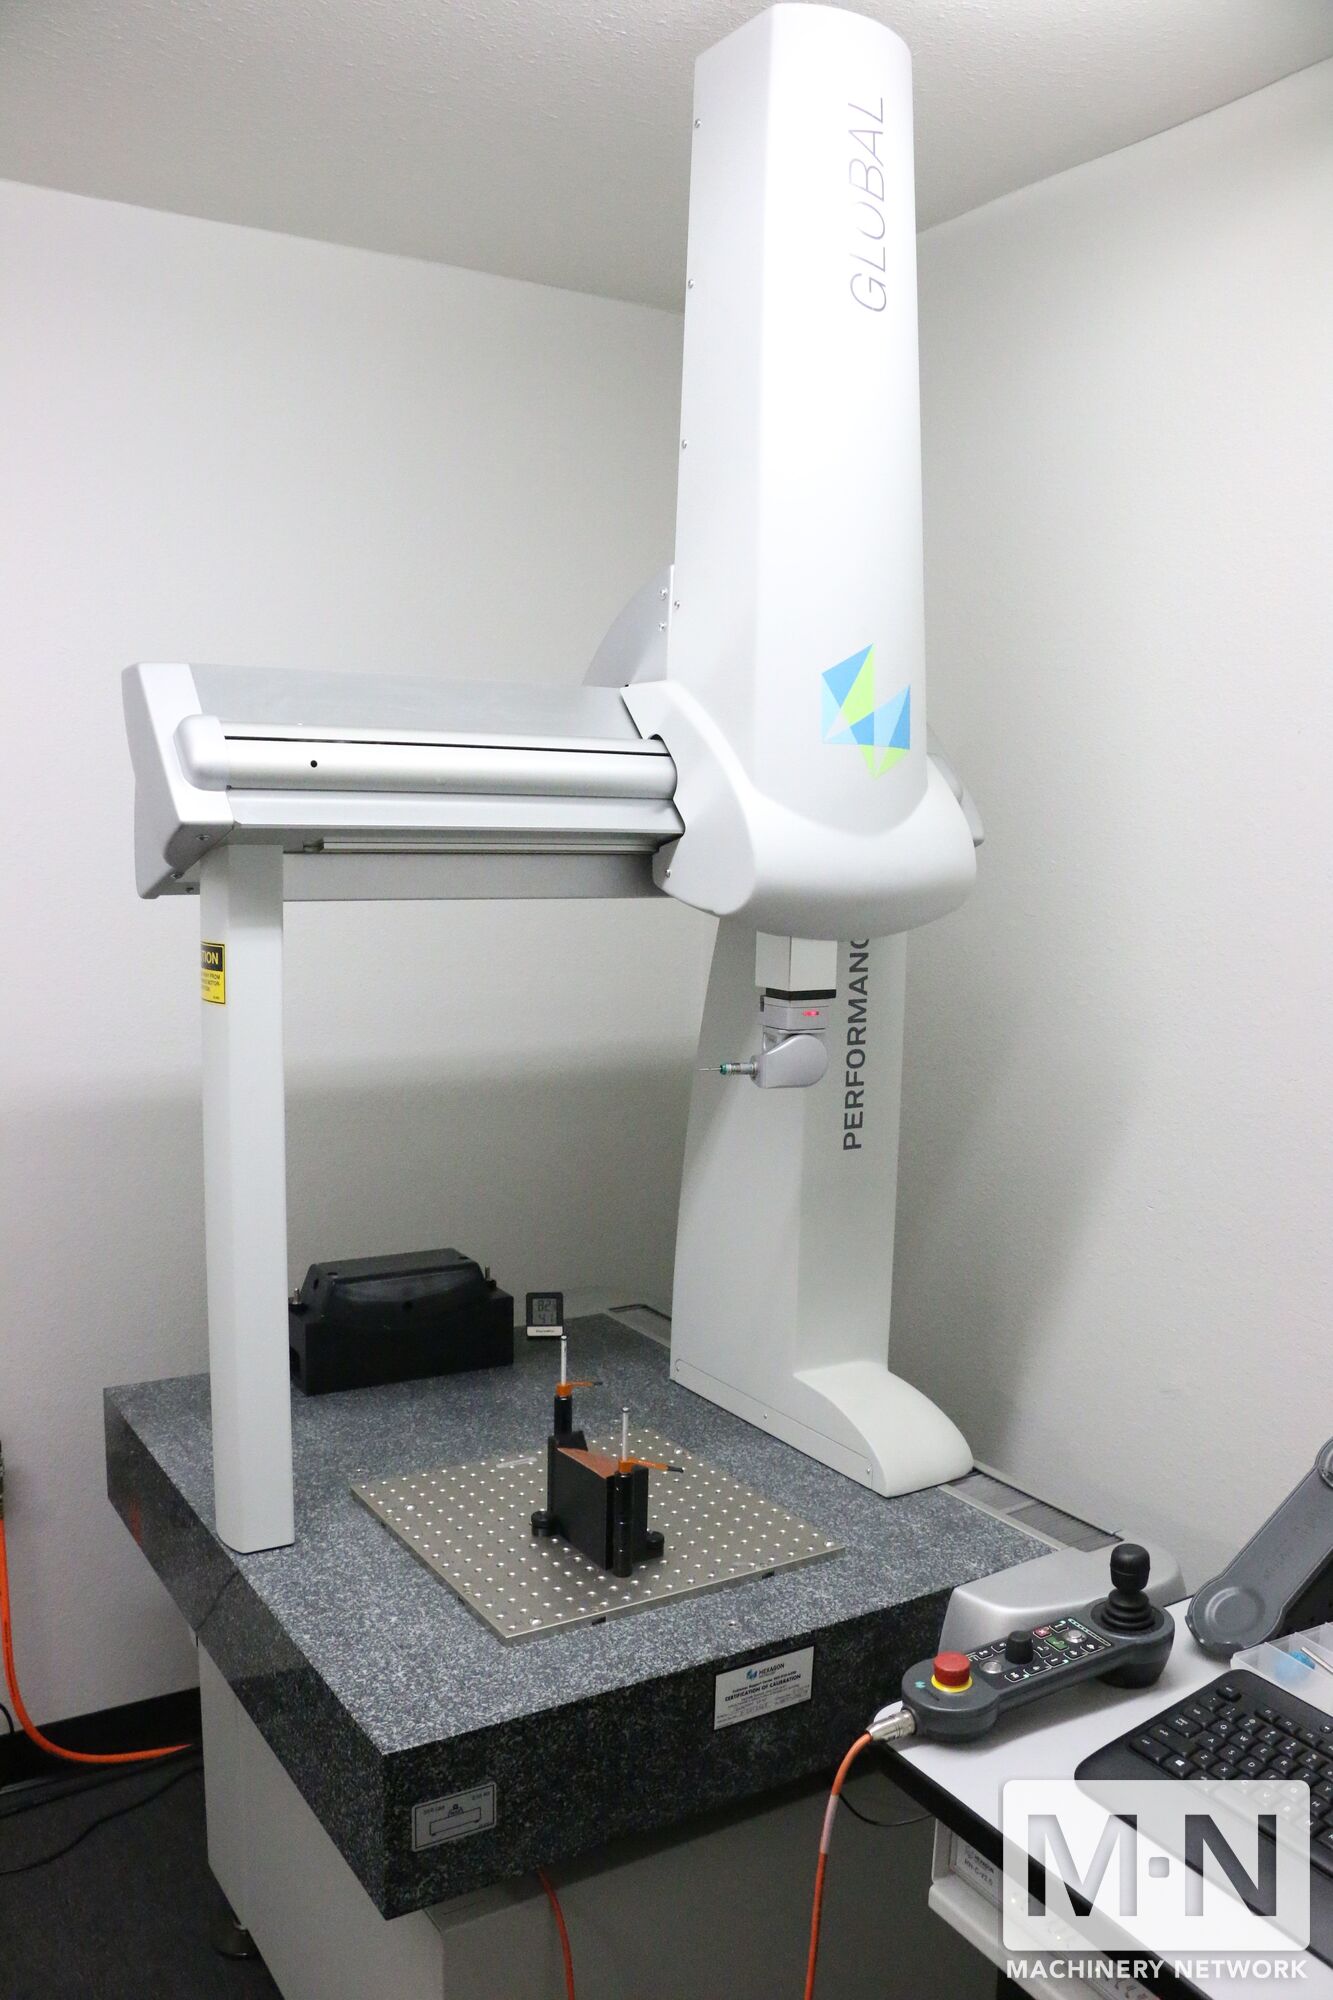 2017 HEXAGON Global Performance 555 DCC COORDINATE MEASURING MACHINES, (Including N/C & CNC) | Machinery Network Inc.